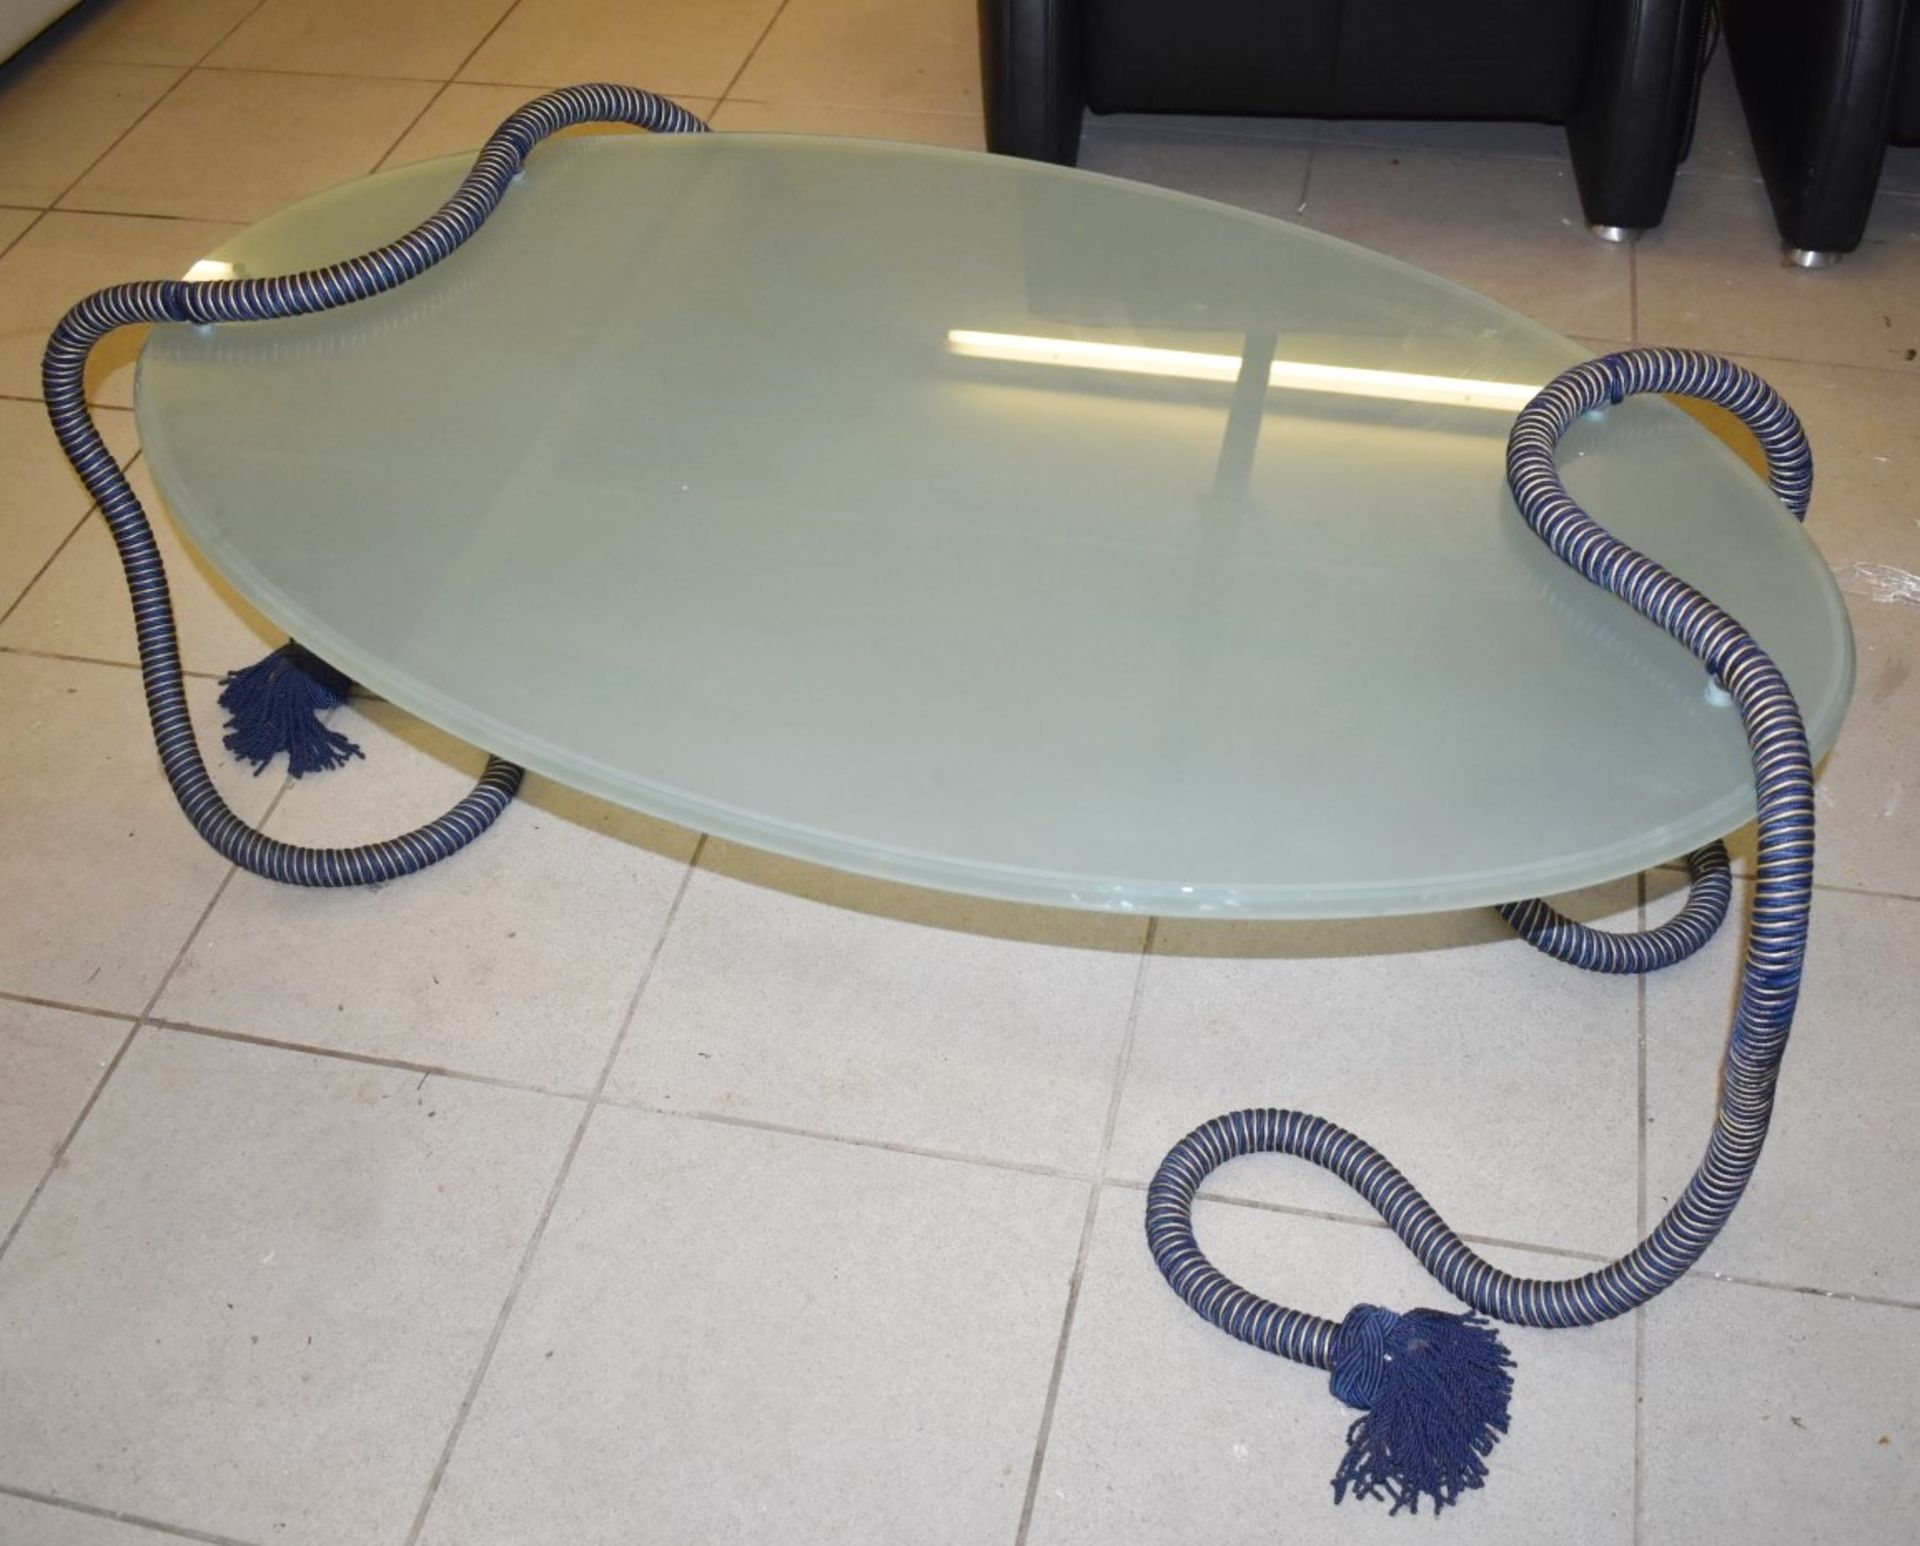 1 x Smoked Glass Coffee Table - Elevated Design With Rope Legs - To Be Removed From an Exclusive - Image 5 of 5